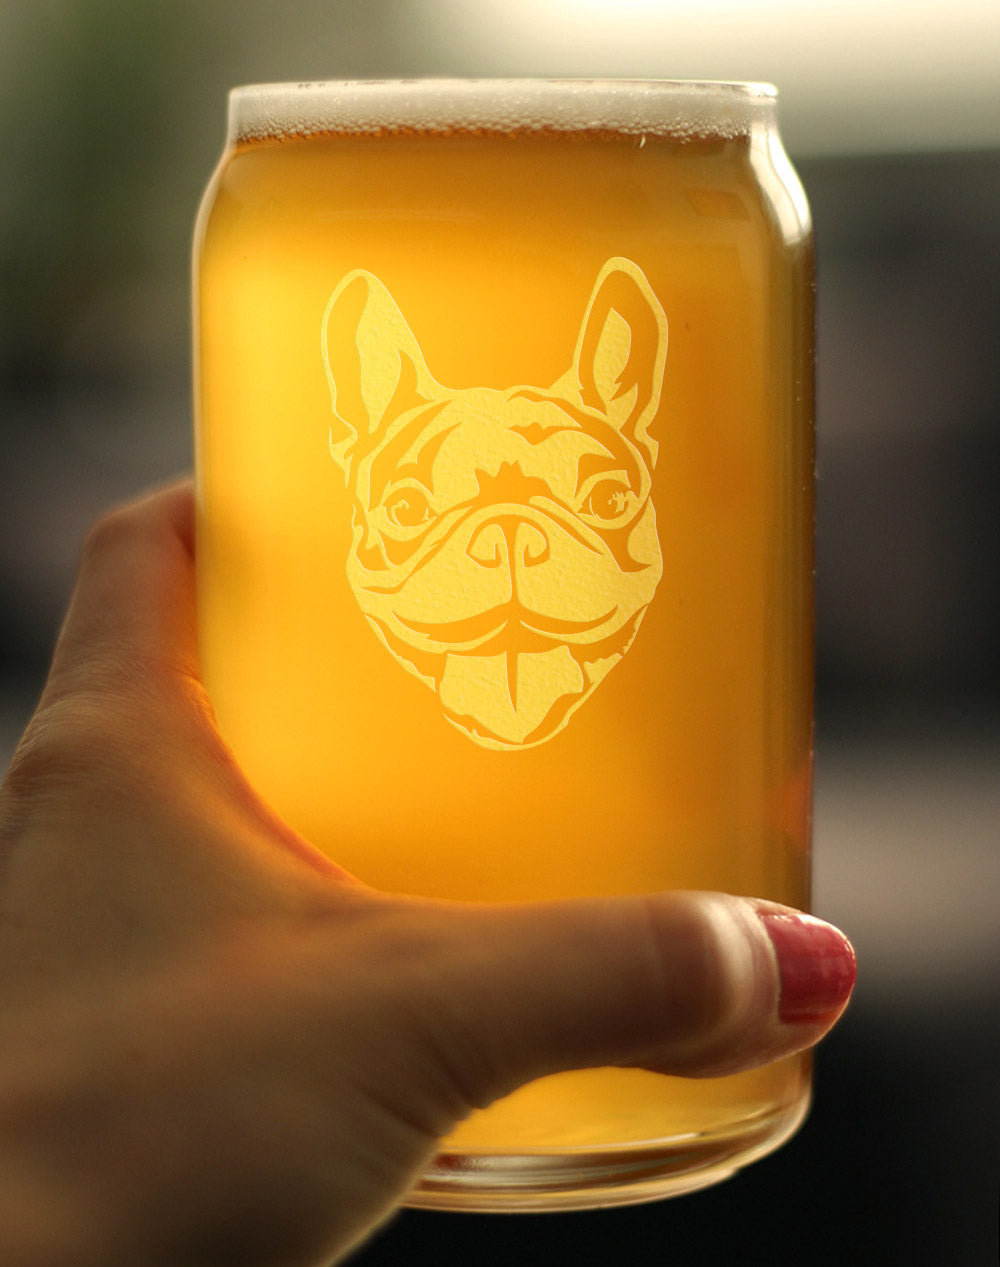 Happy Frenchie - Beer Can Pint Glass - Fun Unique French Bulldog Dog Themed Décor and Gifts for Men &amp; Women - 16 oz